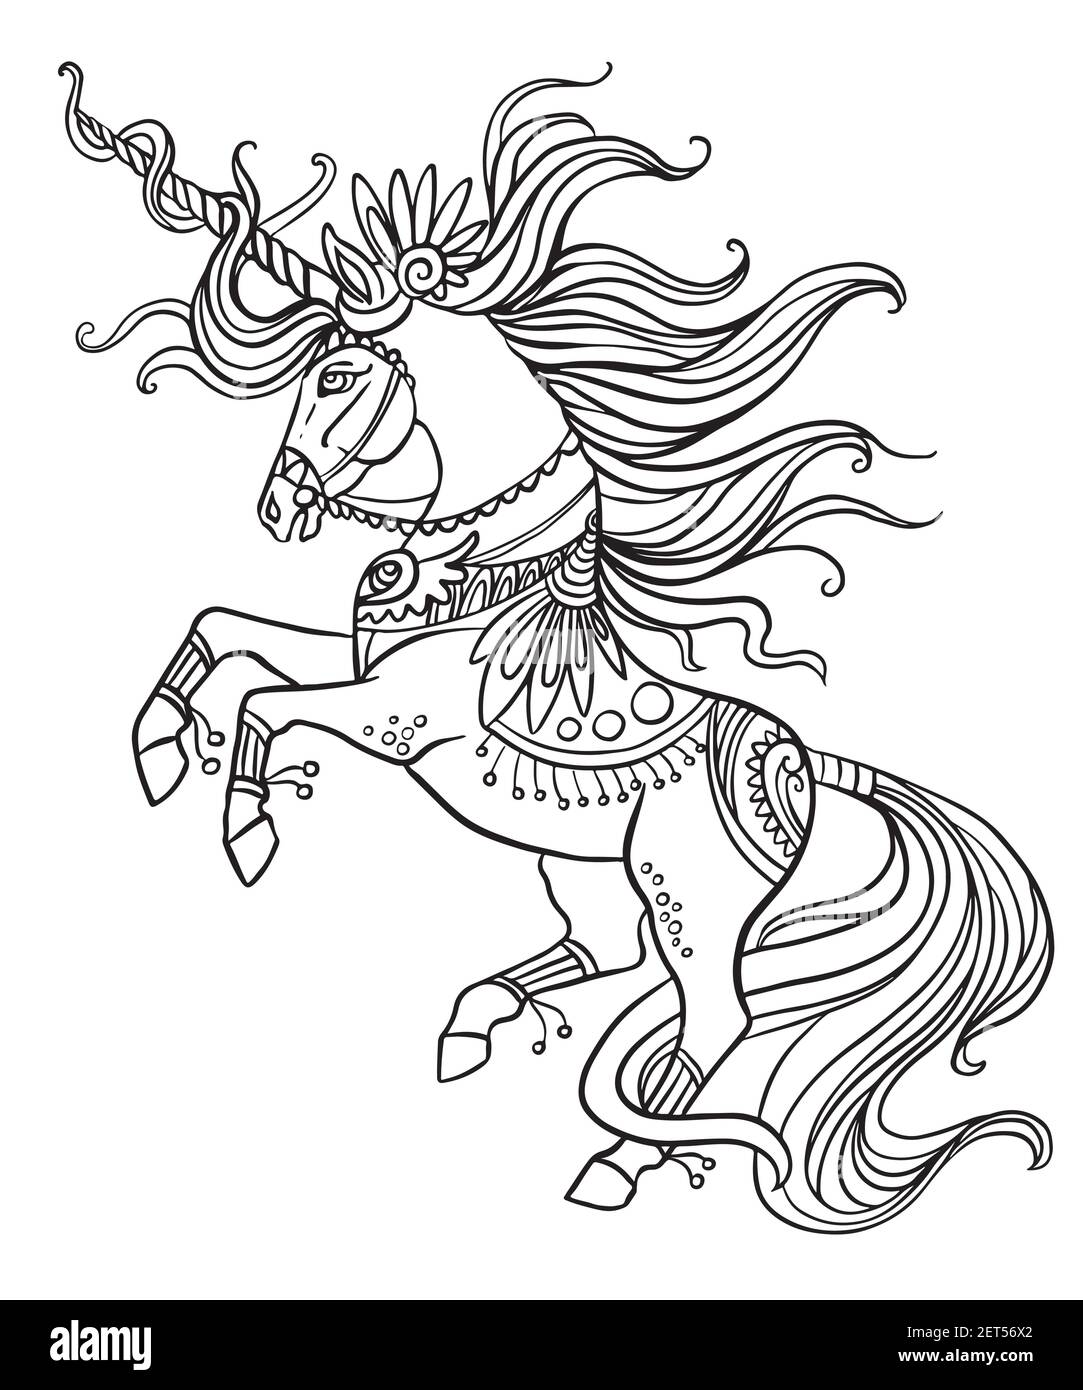 Elegant ornate unicorn with a long mane. Vector black and white isolated contour illustration for coloring book pages, design, prints, posters, postca Stock Vector